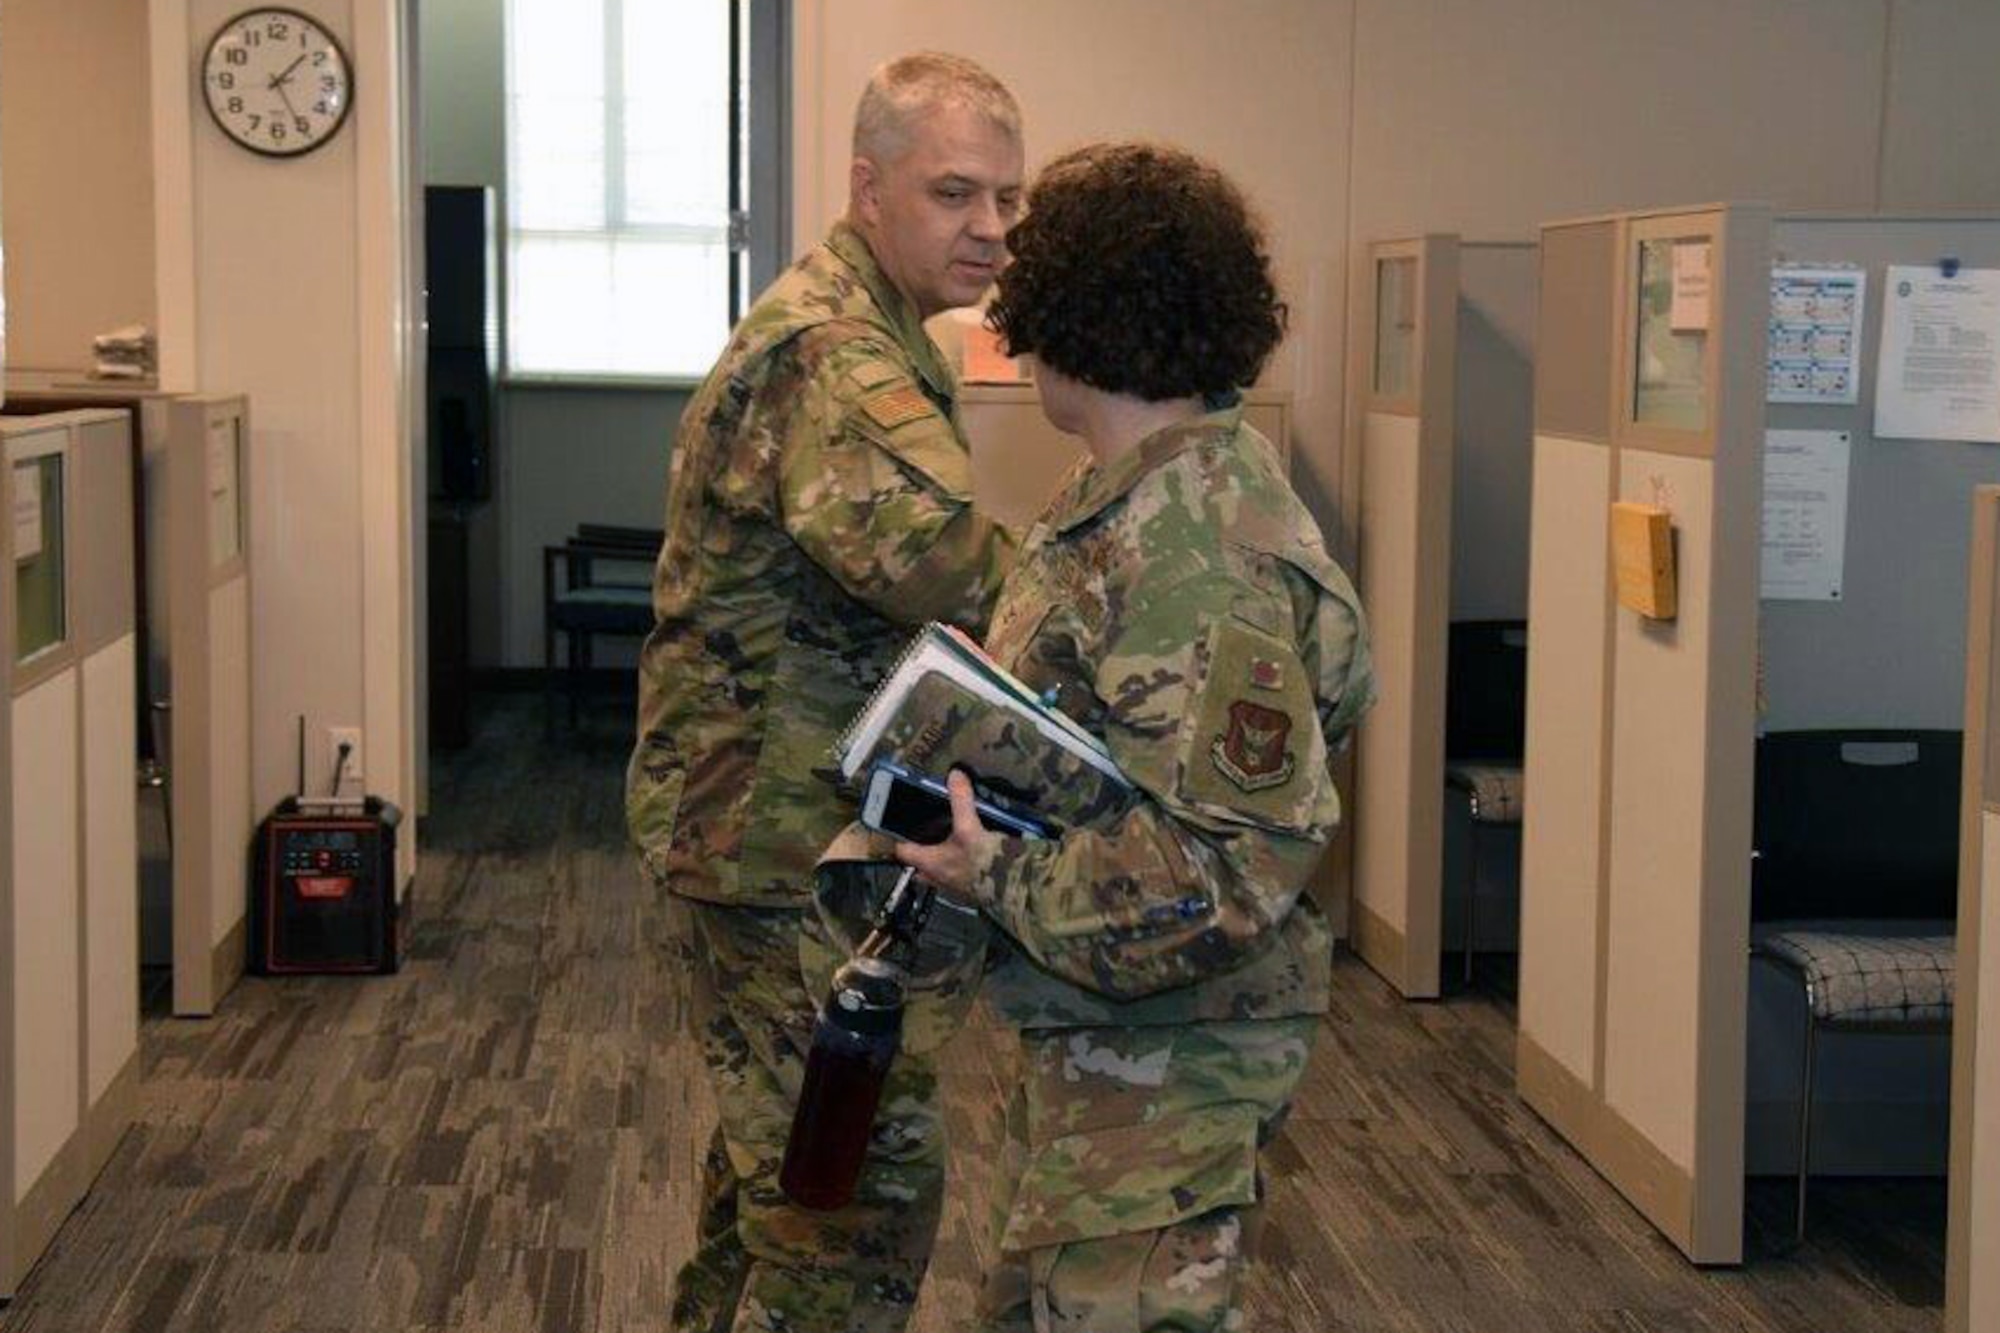 Col. Wayne M. Williams, 433rd Mission Support Group commander, Joint Base San Antonio-Lackland, Texas, greets Col. Lisa M. Craig, Headquarters Air Force Reserve Command A1 director of manpower, personnel and services, Robins Air Force Base, Georgia, for a tour of the 433rd Airlift Wing’s newly renovated buildings here, June 18, 2020.